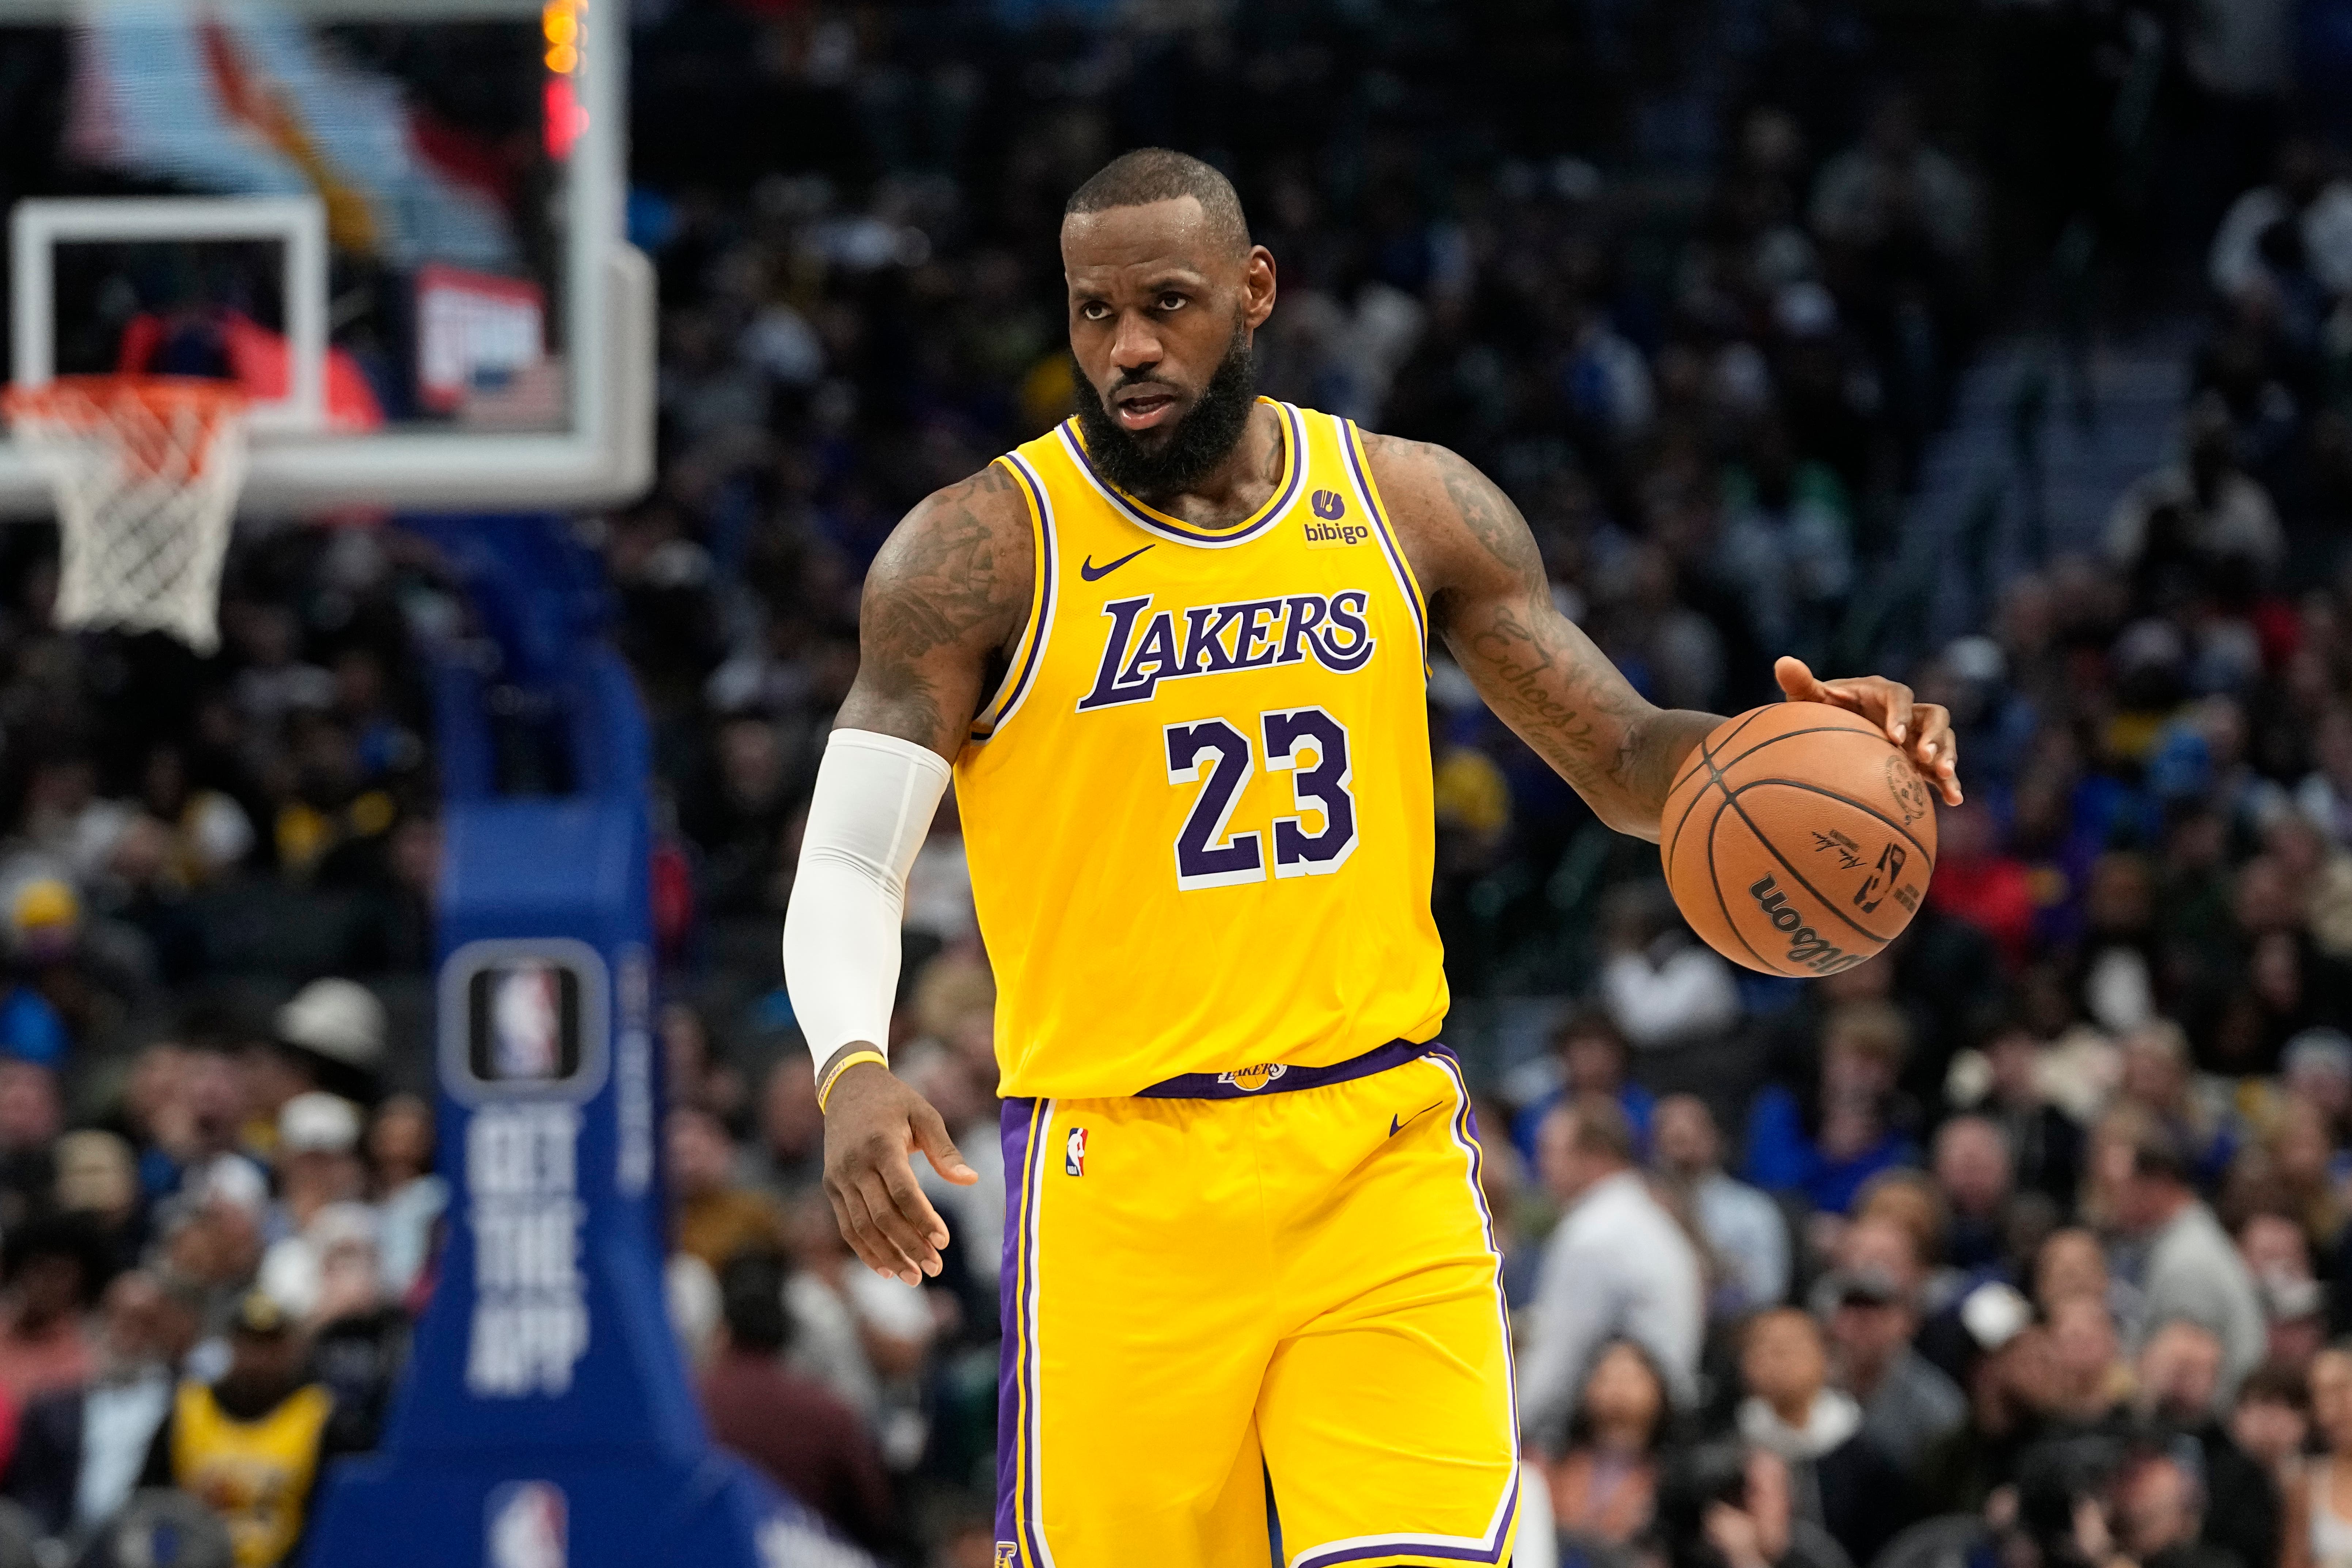 LeBron James expected to play in London ahead of Paris Olympics